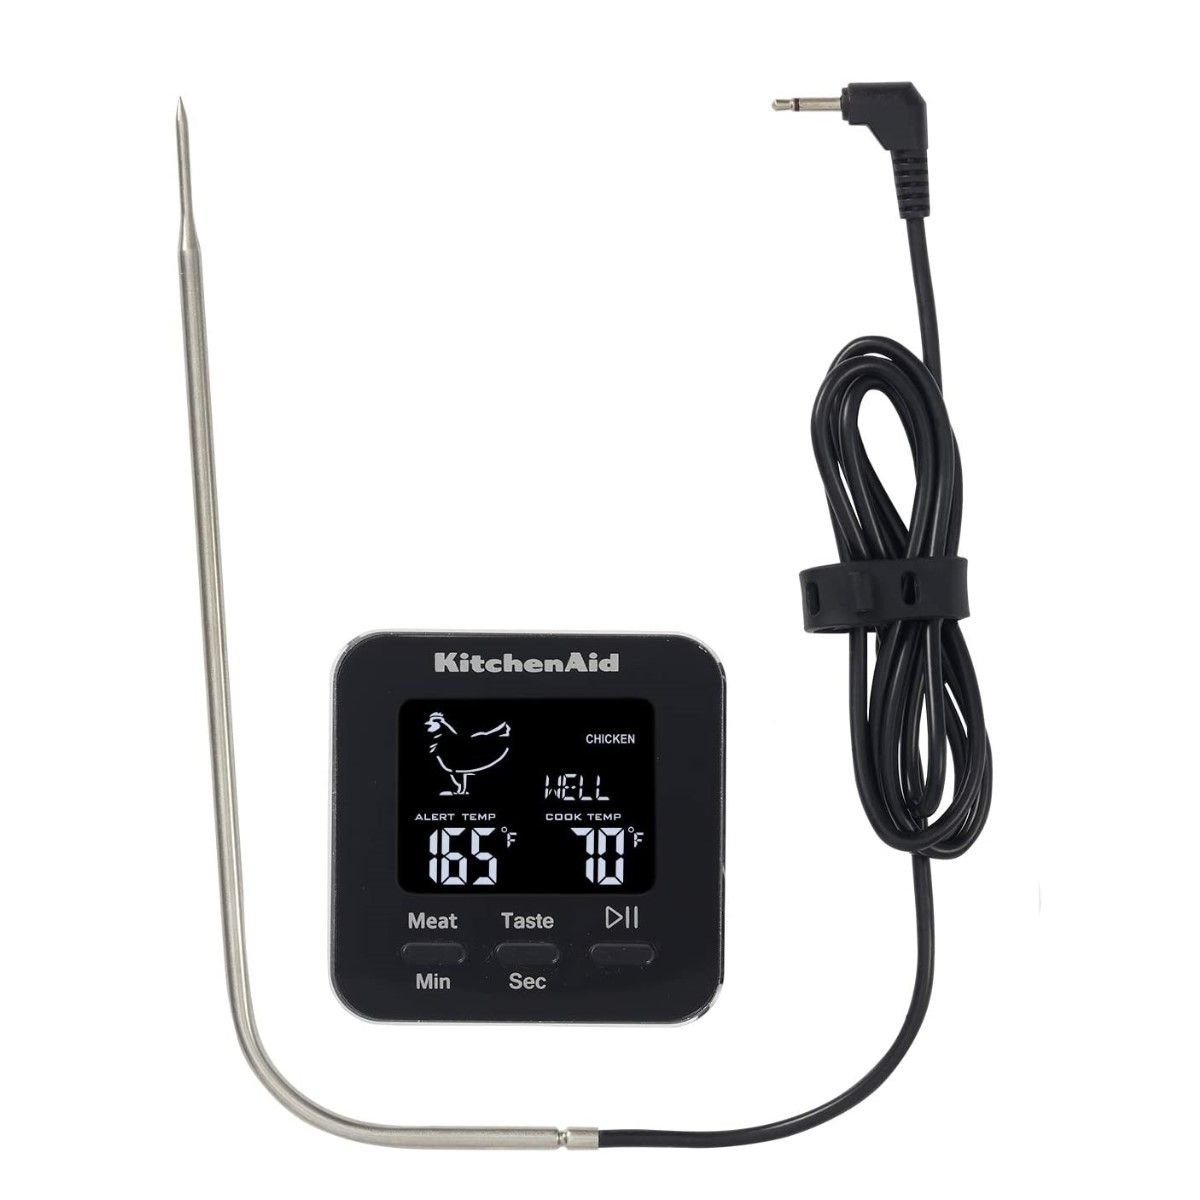 KitchenAid KQ901 Instant Read Food Thermometer for Kitchen or Grill,  TEMPERATURE RANGE: 20F to 220F, 1 inch dial, Black